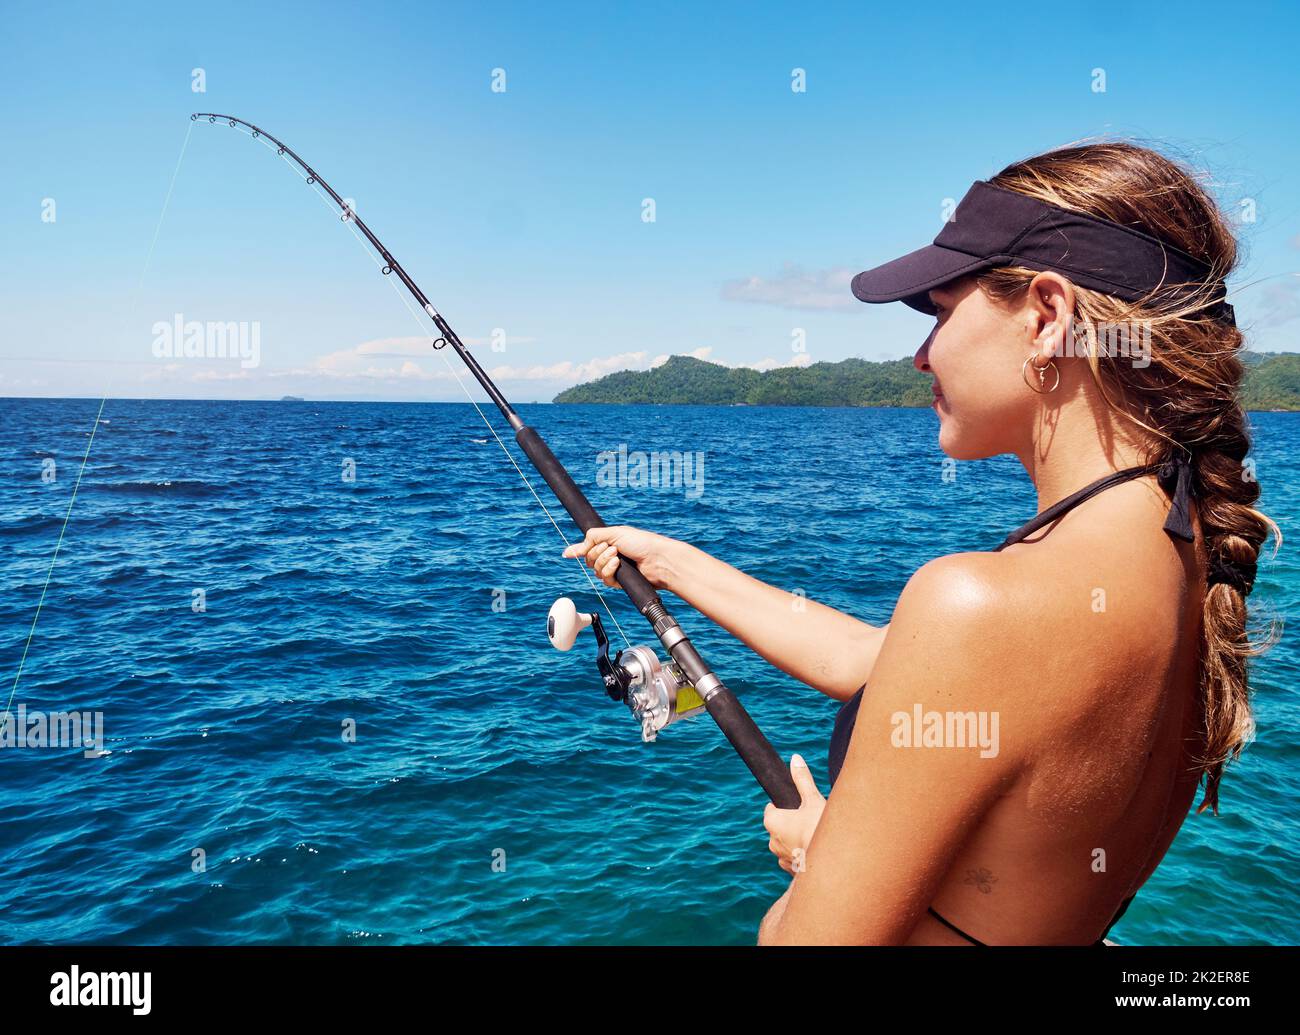 Im just reeling in the good times. Cropped shot of an attractive young woman fishing out at sea. Stock Photo